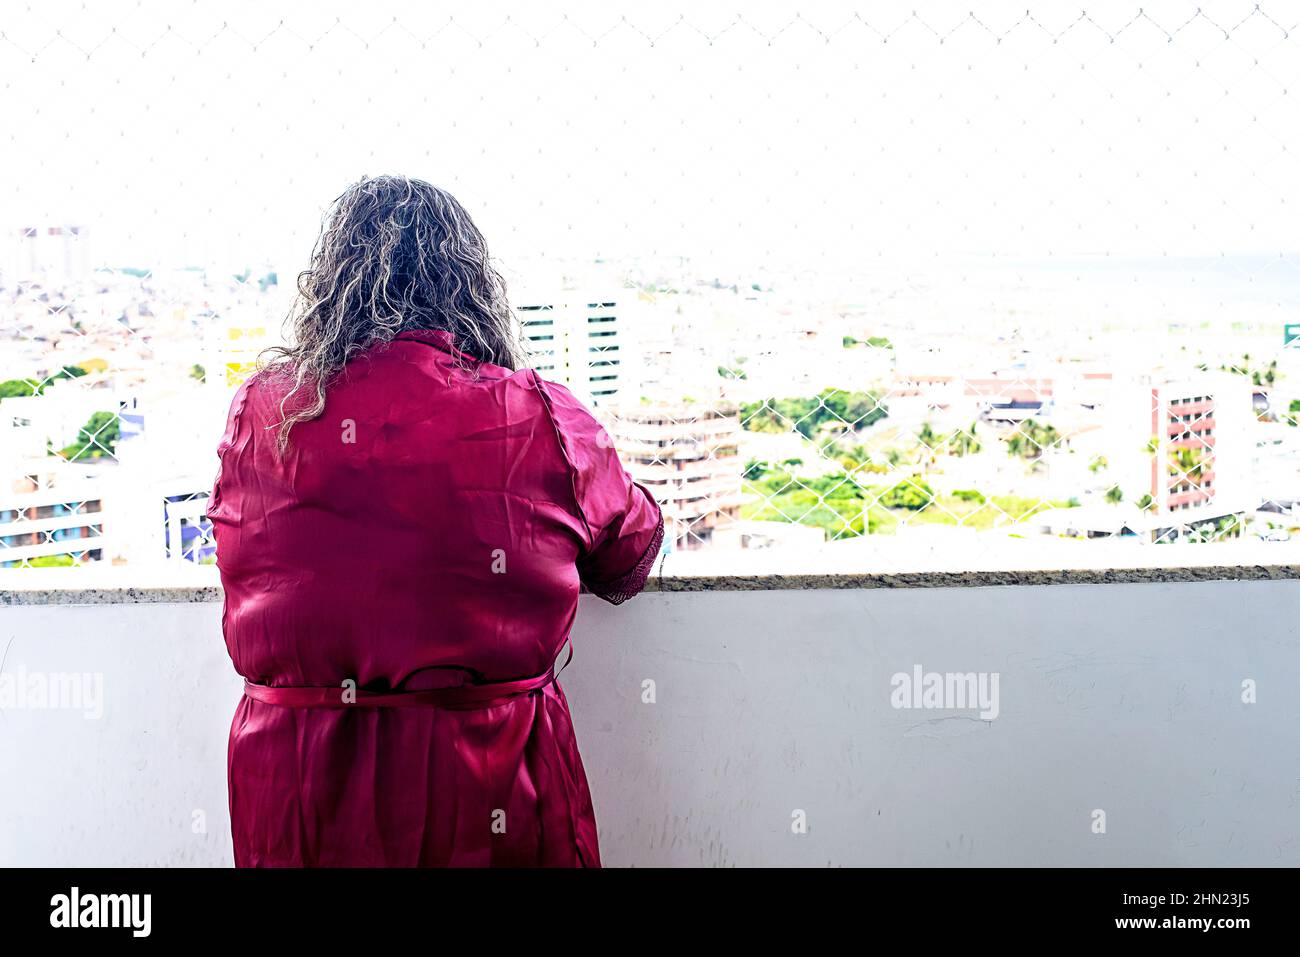 a woman from the back in a purple dress looking at the horizon. Salvador, Bahia, Brazil. Stock Photo